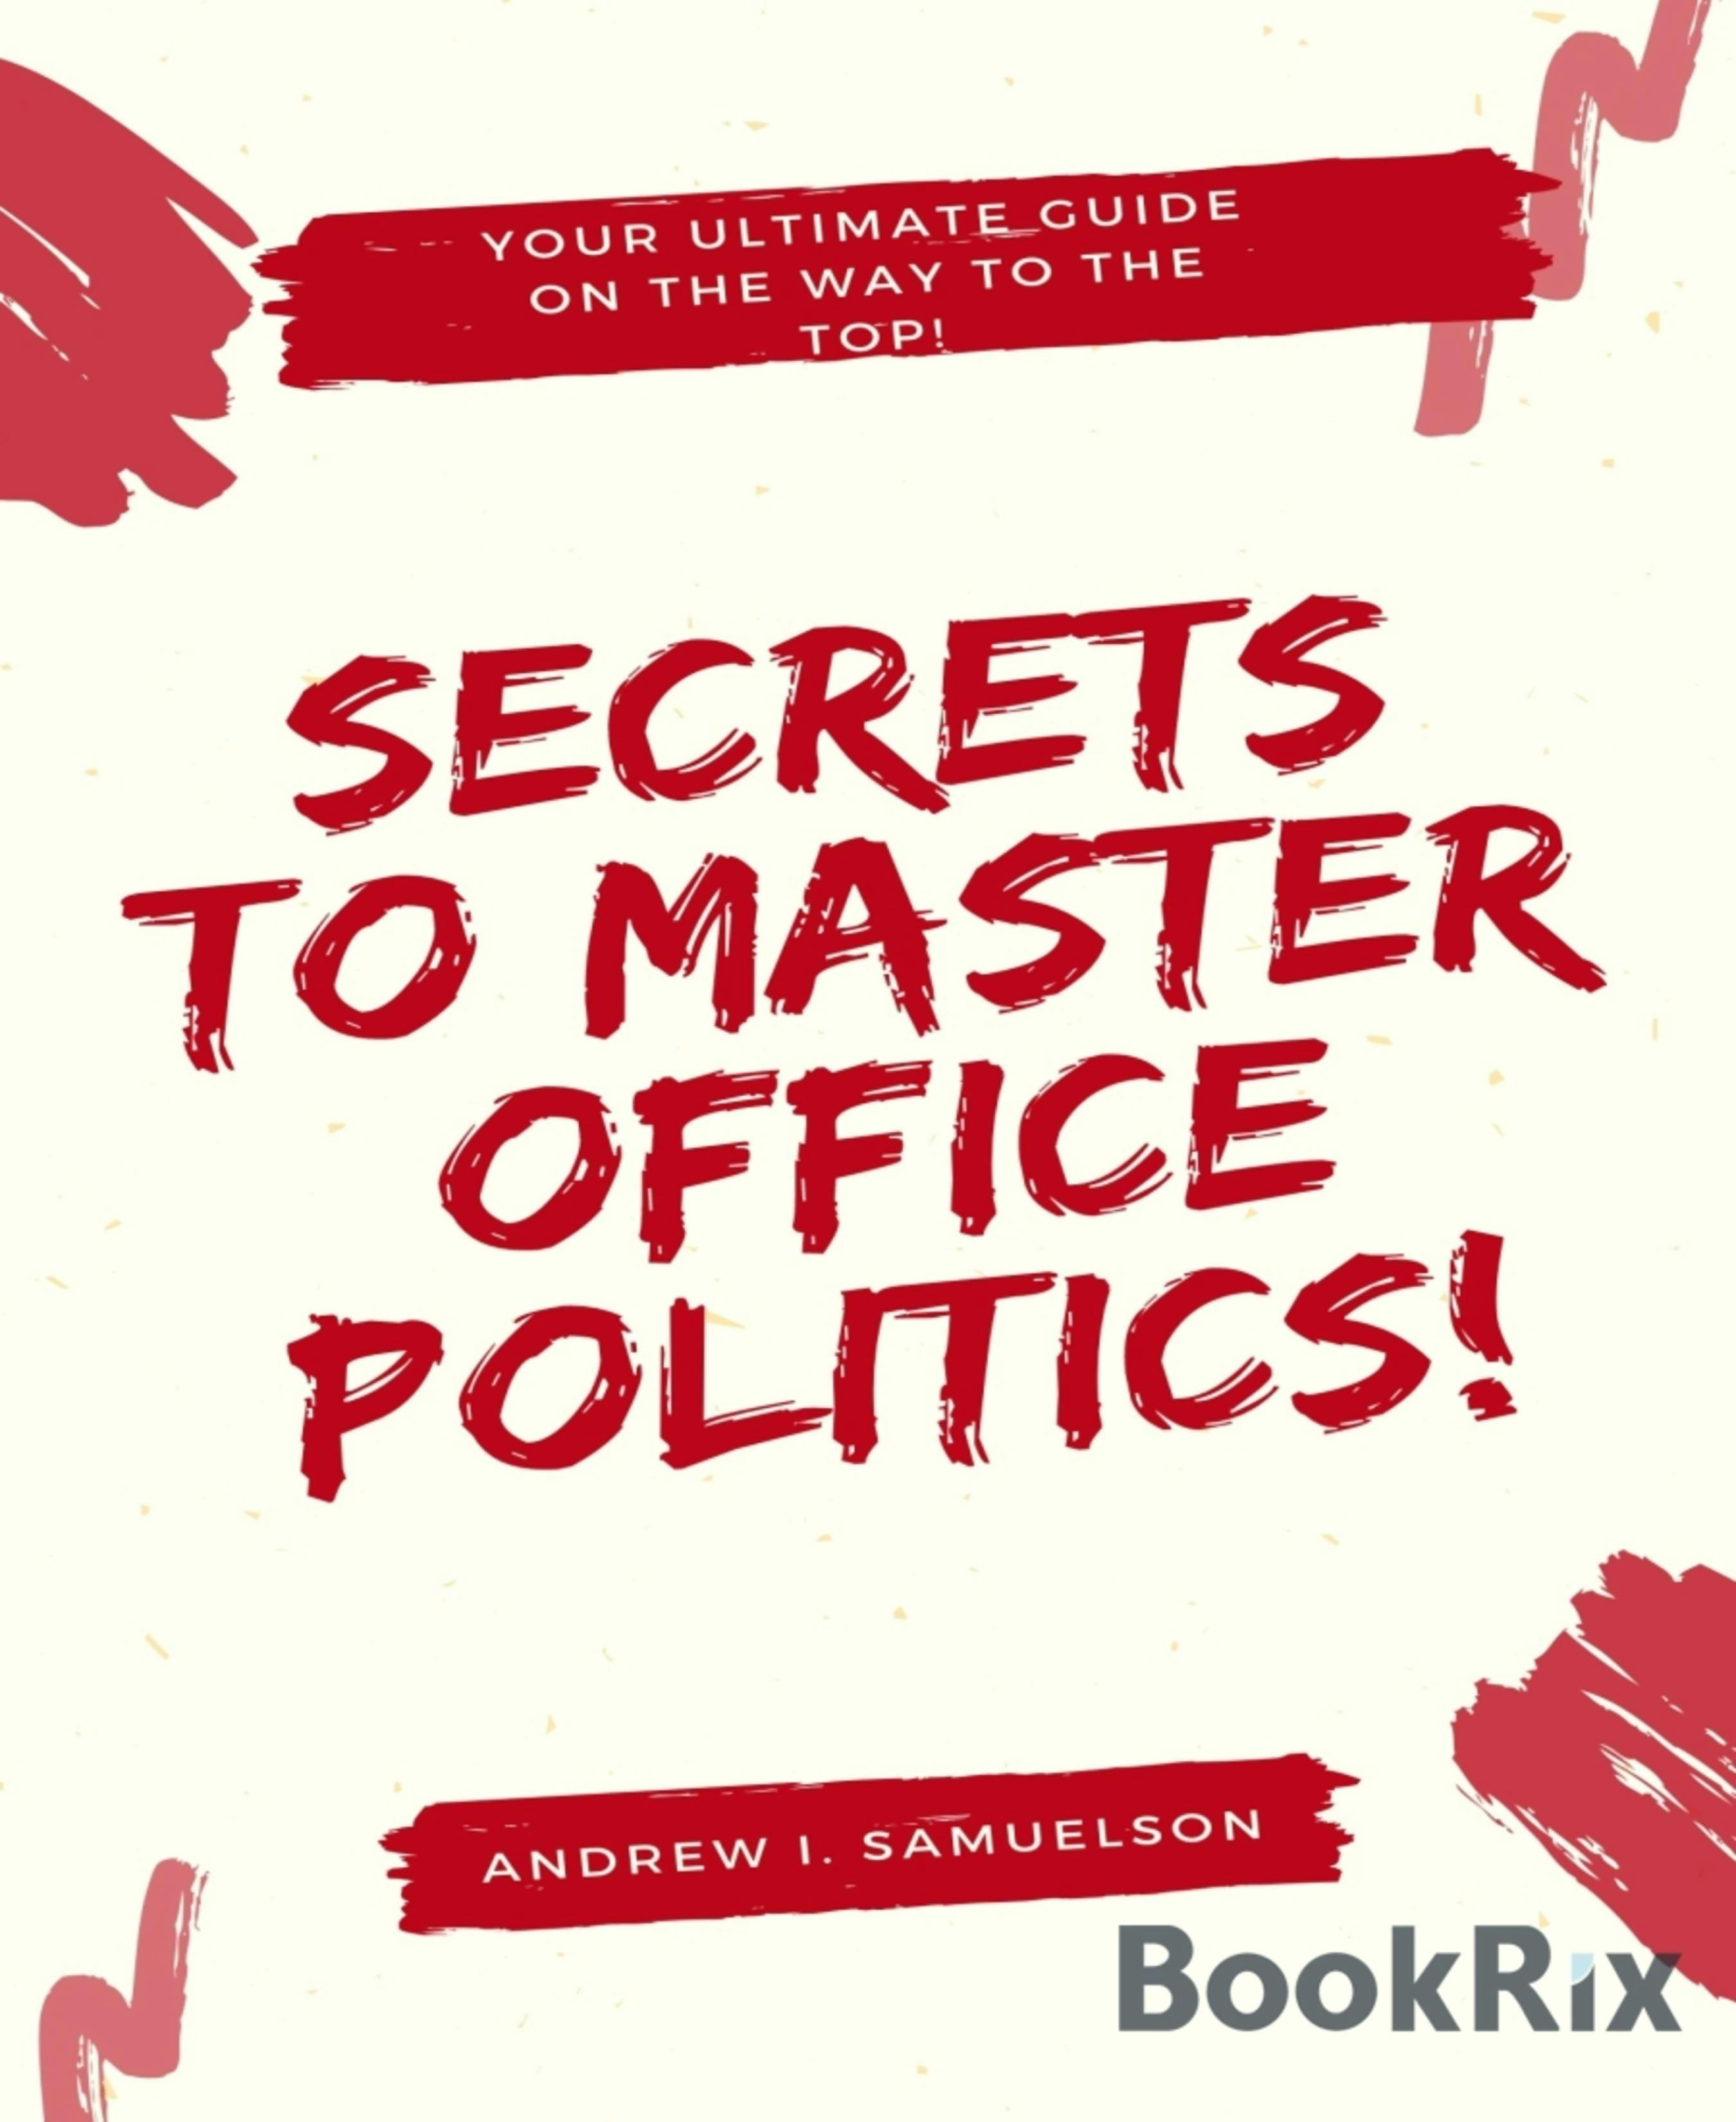 Secrets To Master Office Politics!: Your Ultimate Guide on the Way to the Top! - Andrew I. Samuelson